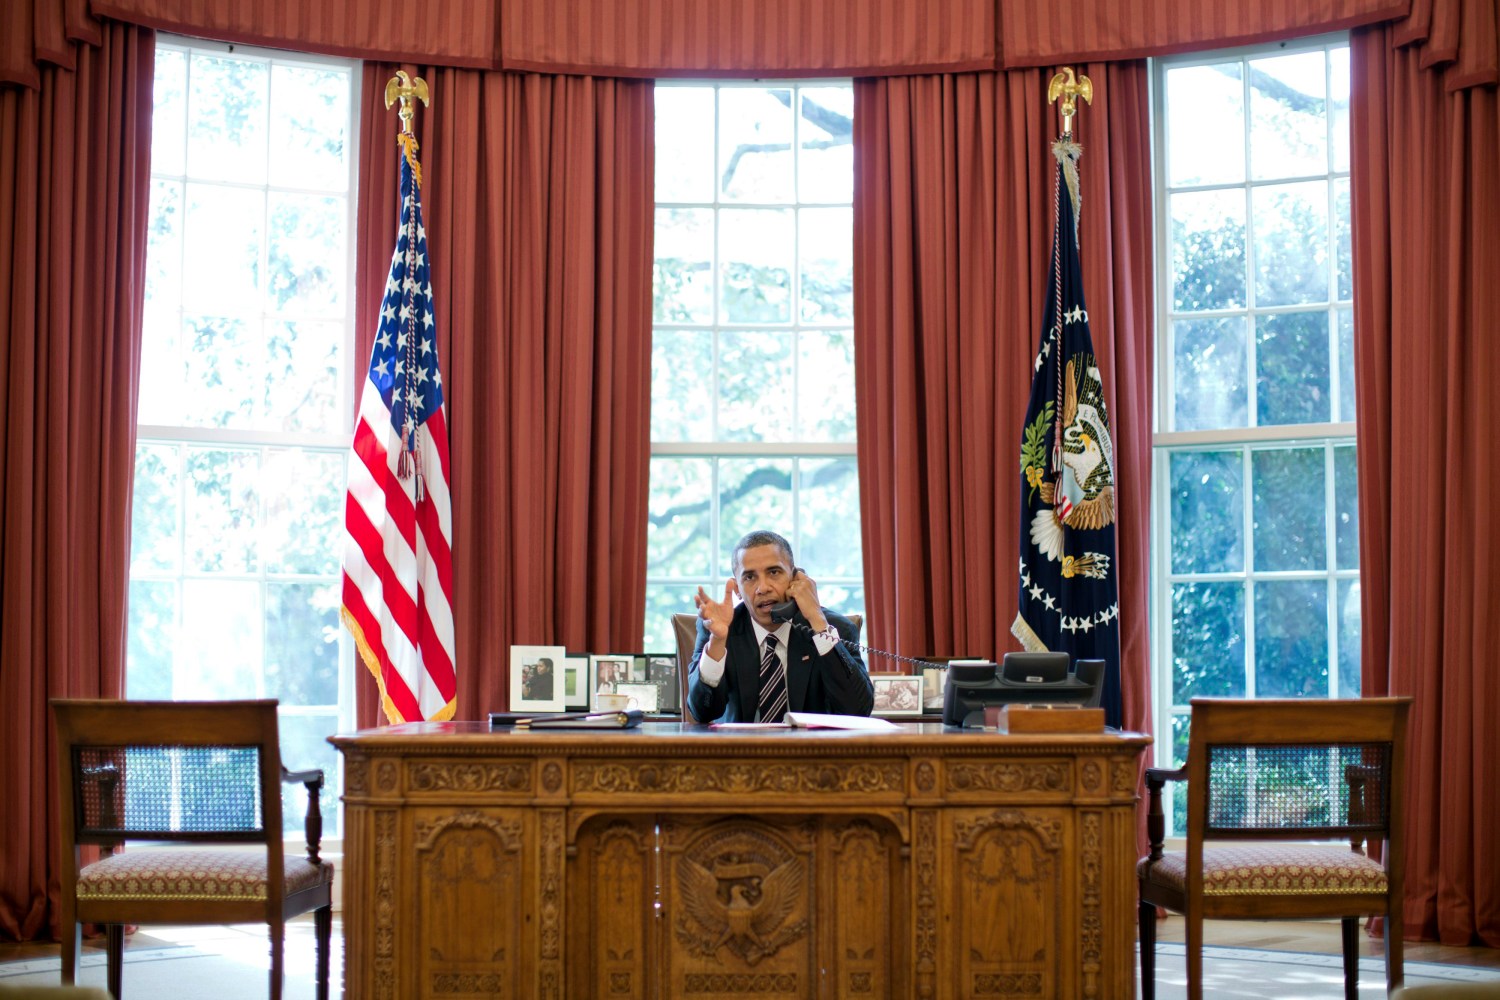 U.S. President Barack Obama speaks on the phone with Israel's Prime Minister Benjamin Netanyahu, in the Oval Office in this September 28, 2012 White House handout photograph. Obama and Netanyahu expressed solidarity on the goal of preventing Iran from acquiring a nuclear weapon, the White House said on Friday, amid signs of easing tensions over their differences on how to confront Tehran.